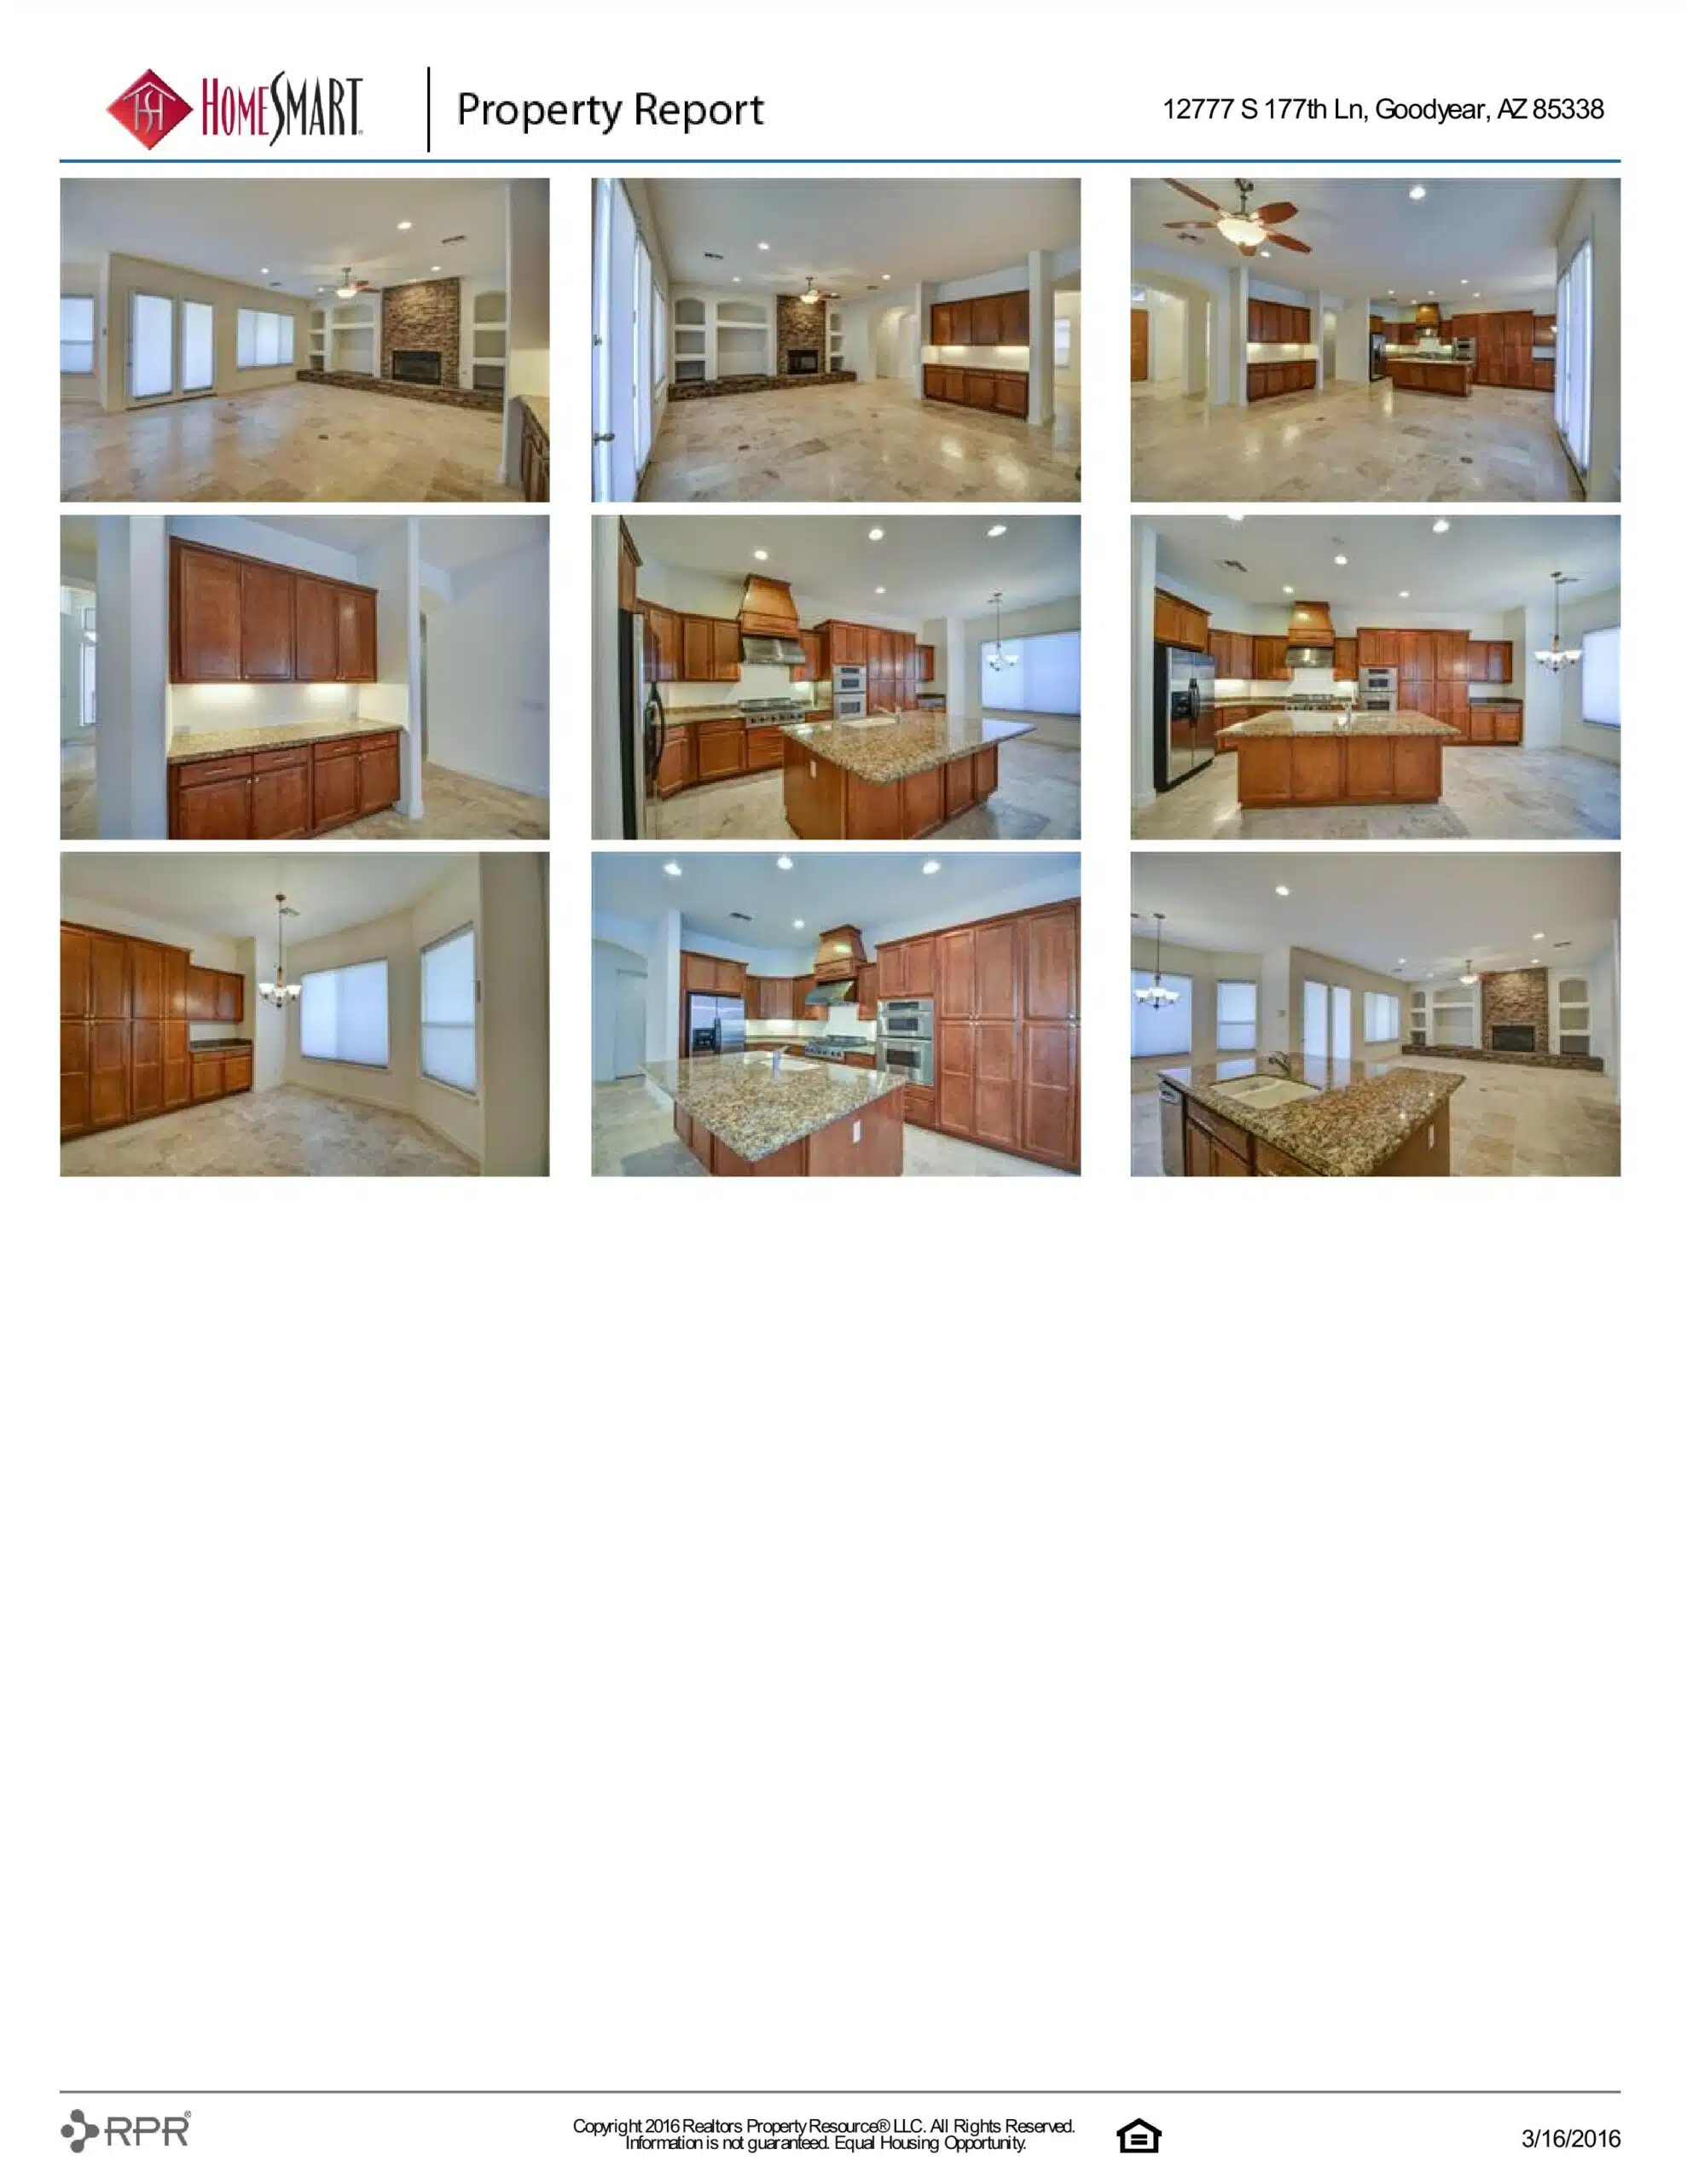 12777 S 177TH LANE PROPERTY REPORT-page-007